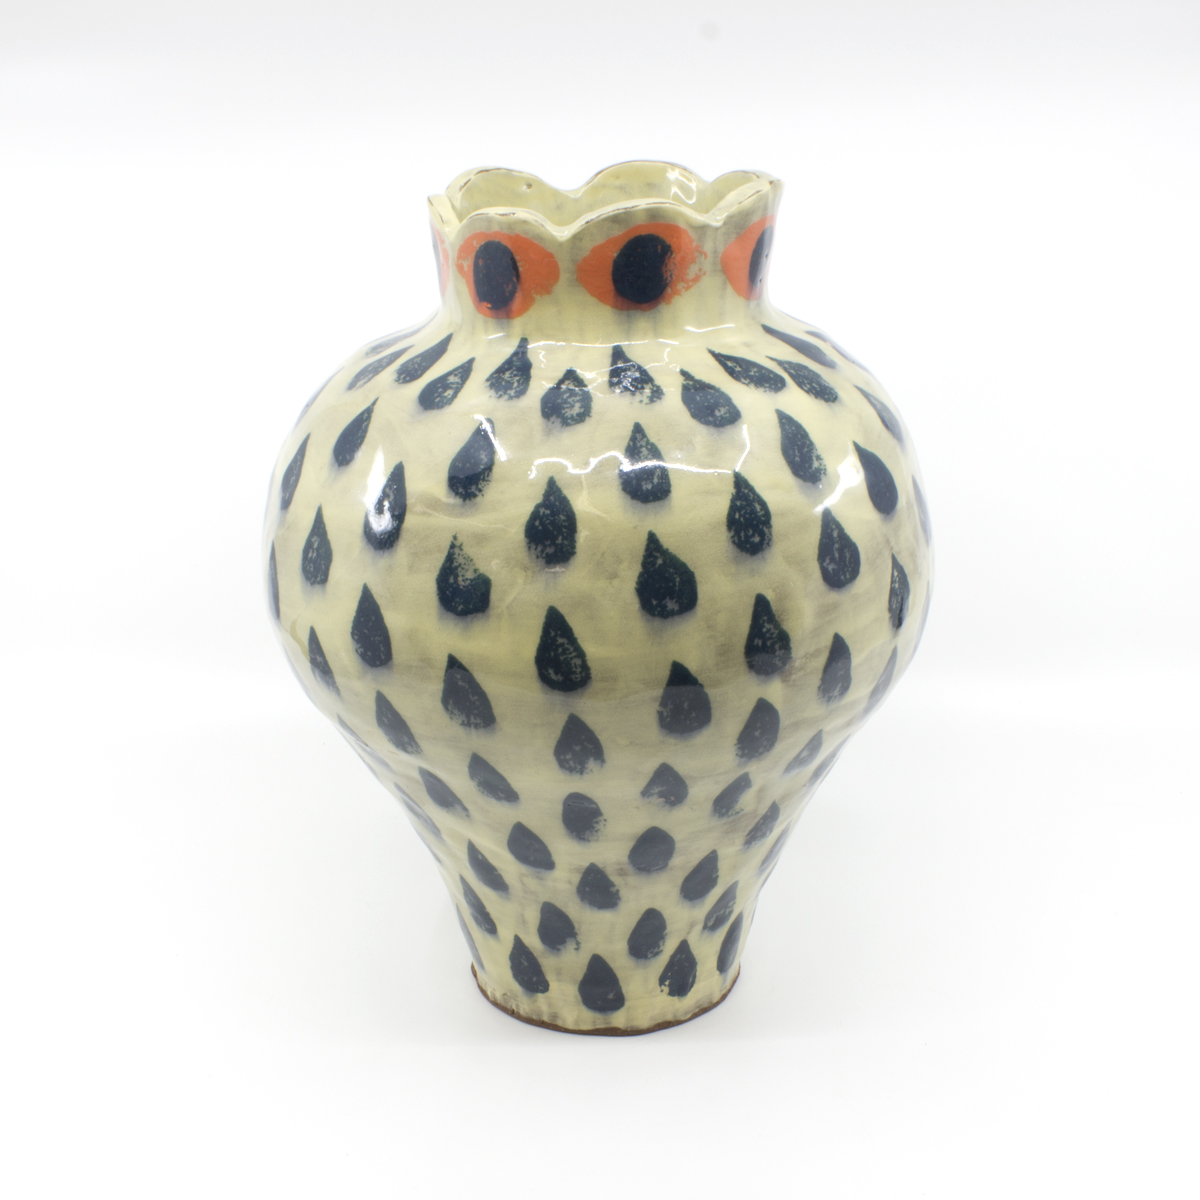 Wide ceramic vase with a narrow opening. A glazed design of navy-colored teardrops covers the vessel along with a ring of orange and navy eyes around the top.